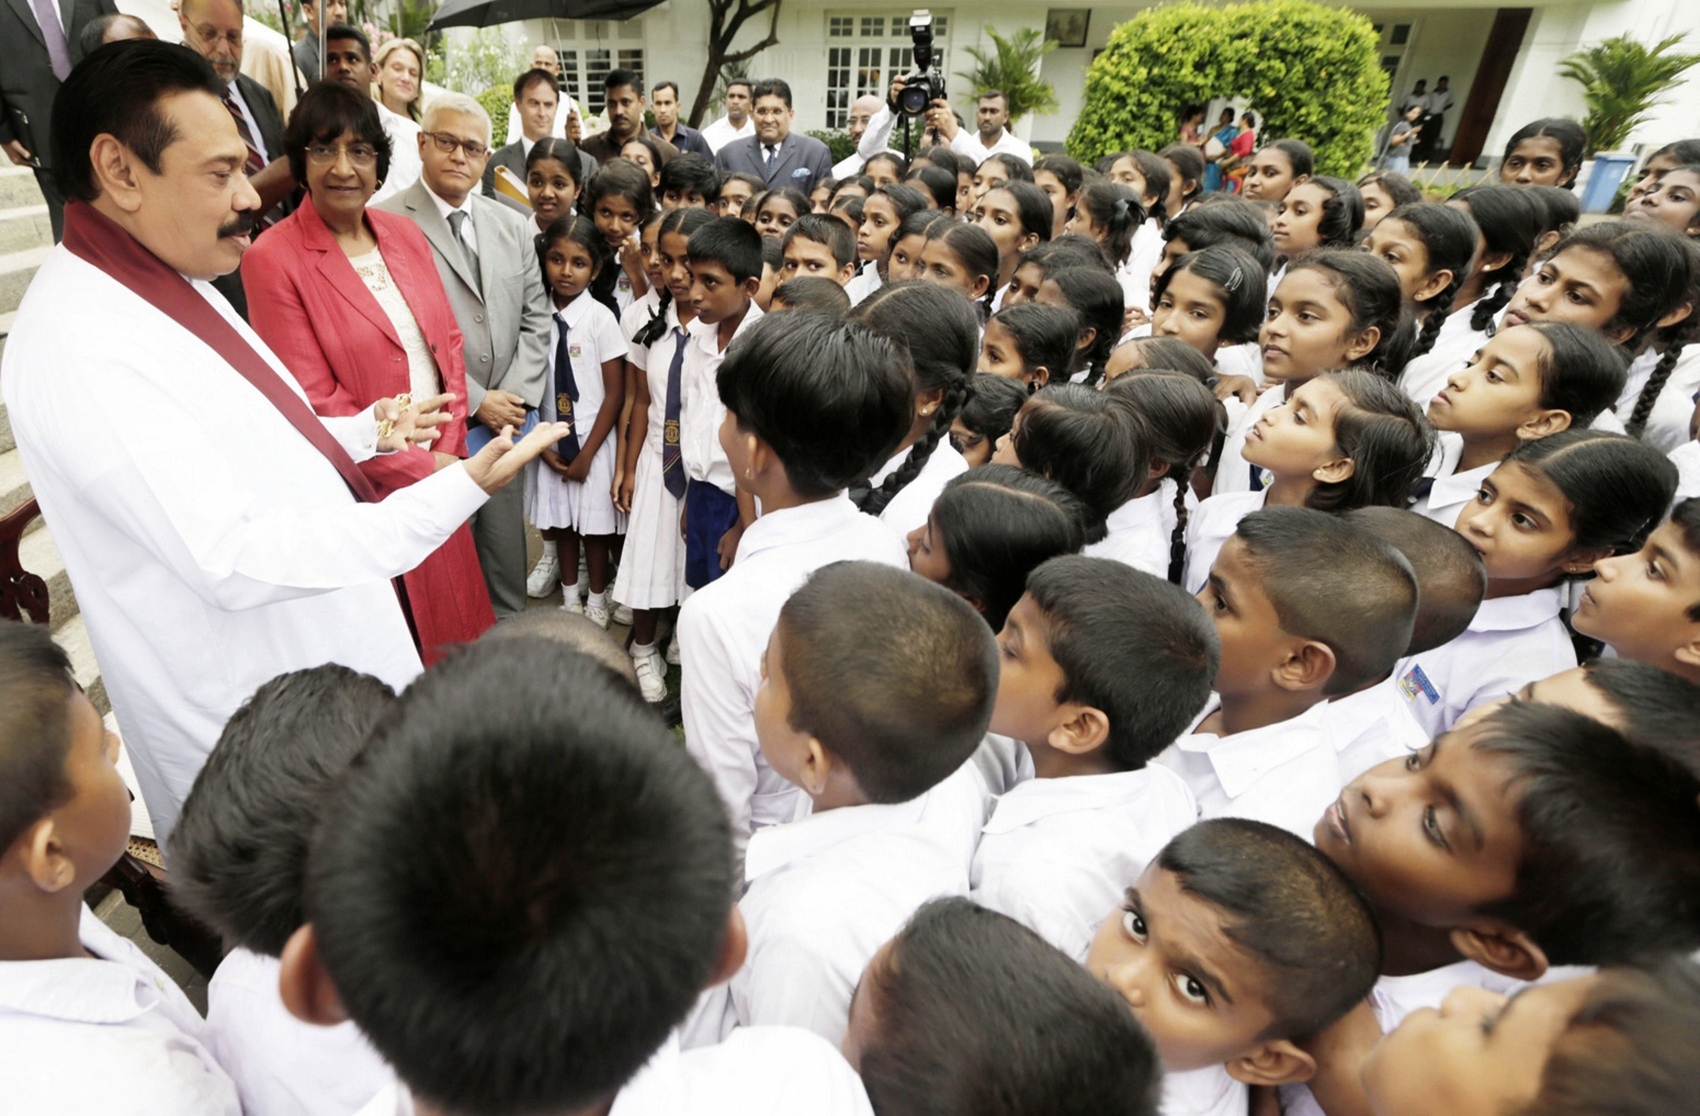 UN human rights chief Navi Pillay (2nd left) looks on as Sri Lankan President Mahinda Rajapakse (left) gestures which meeting visiting schoolchildren at his official residence in Colombo. Photo: AFP